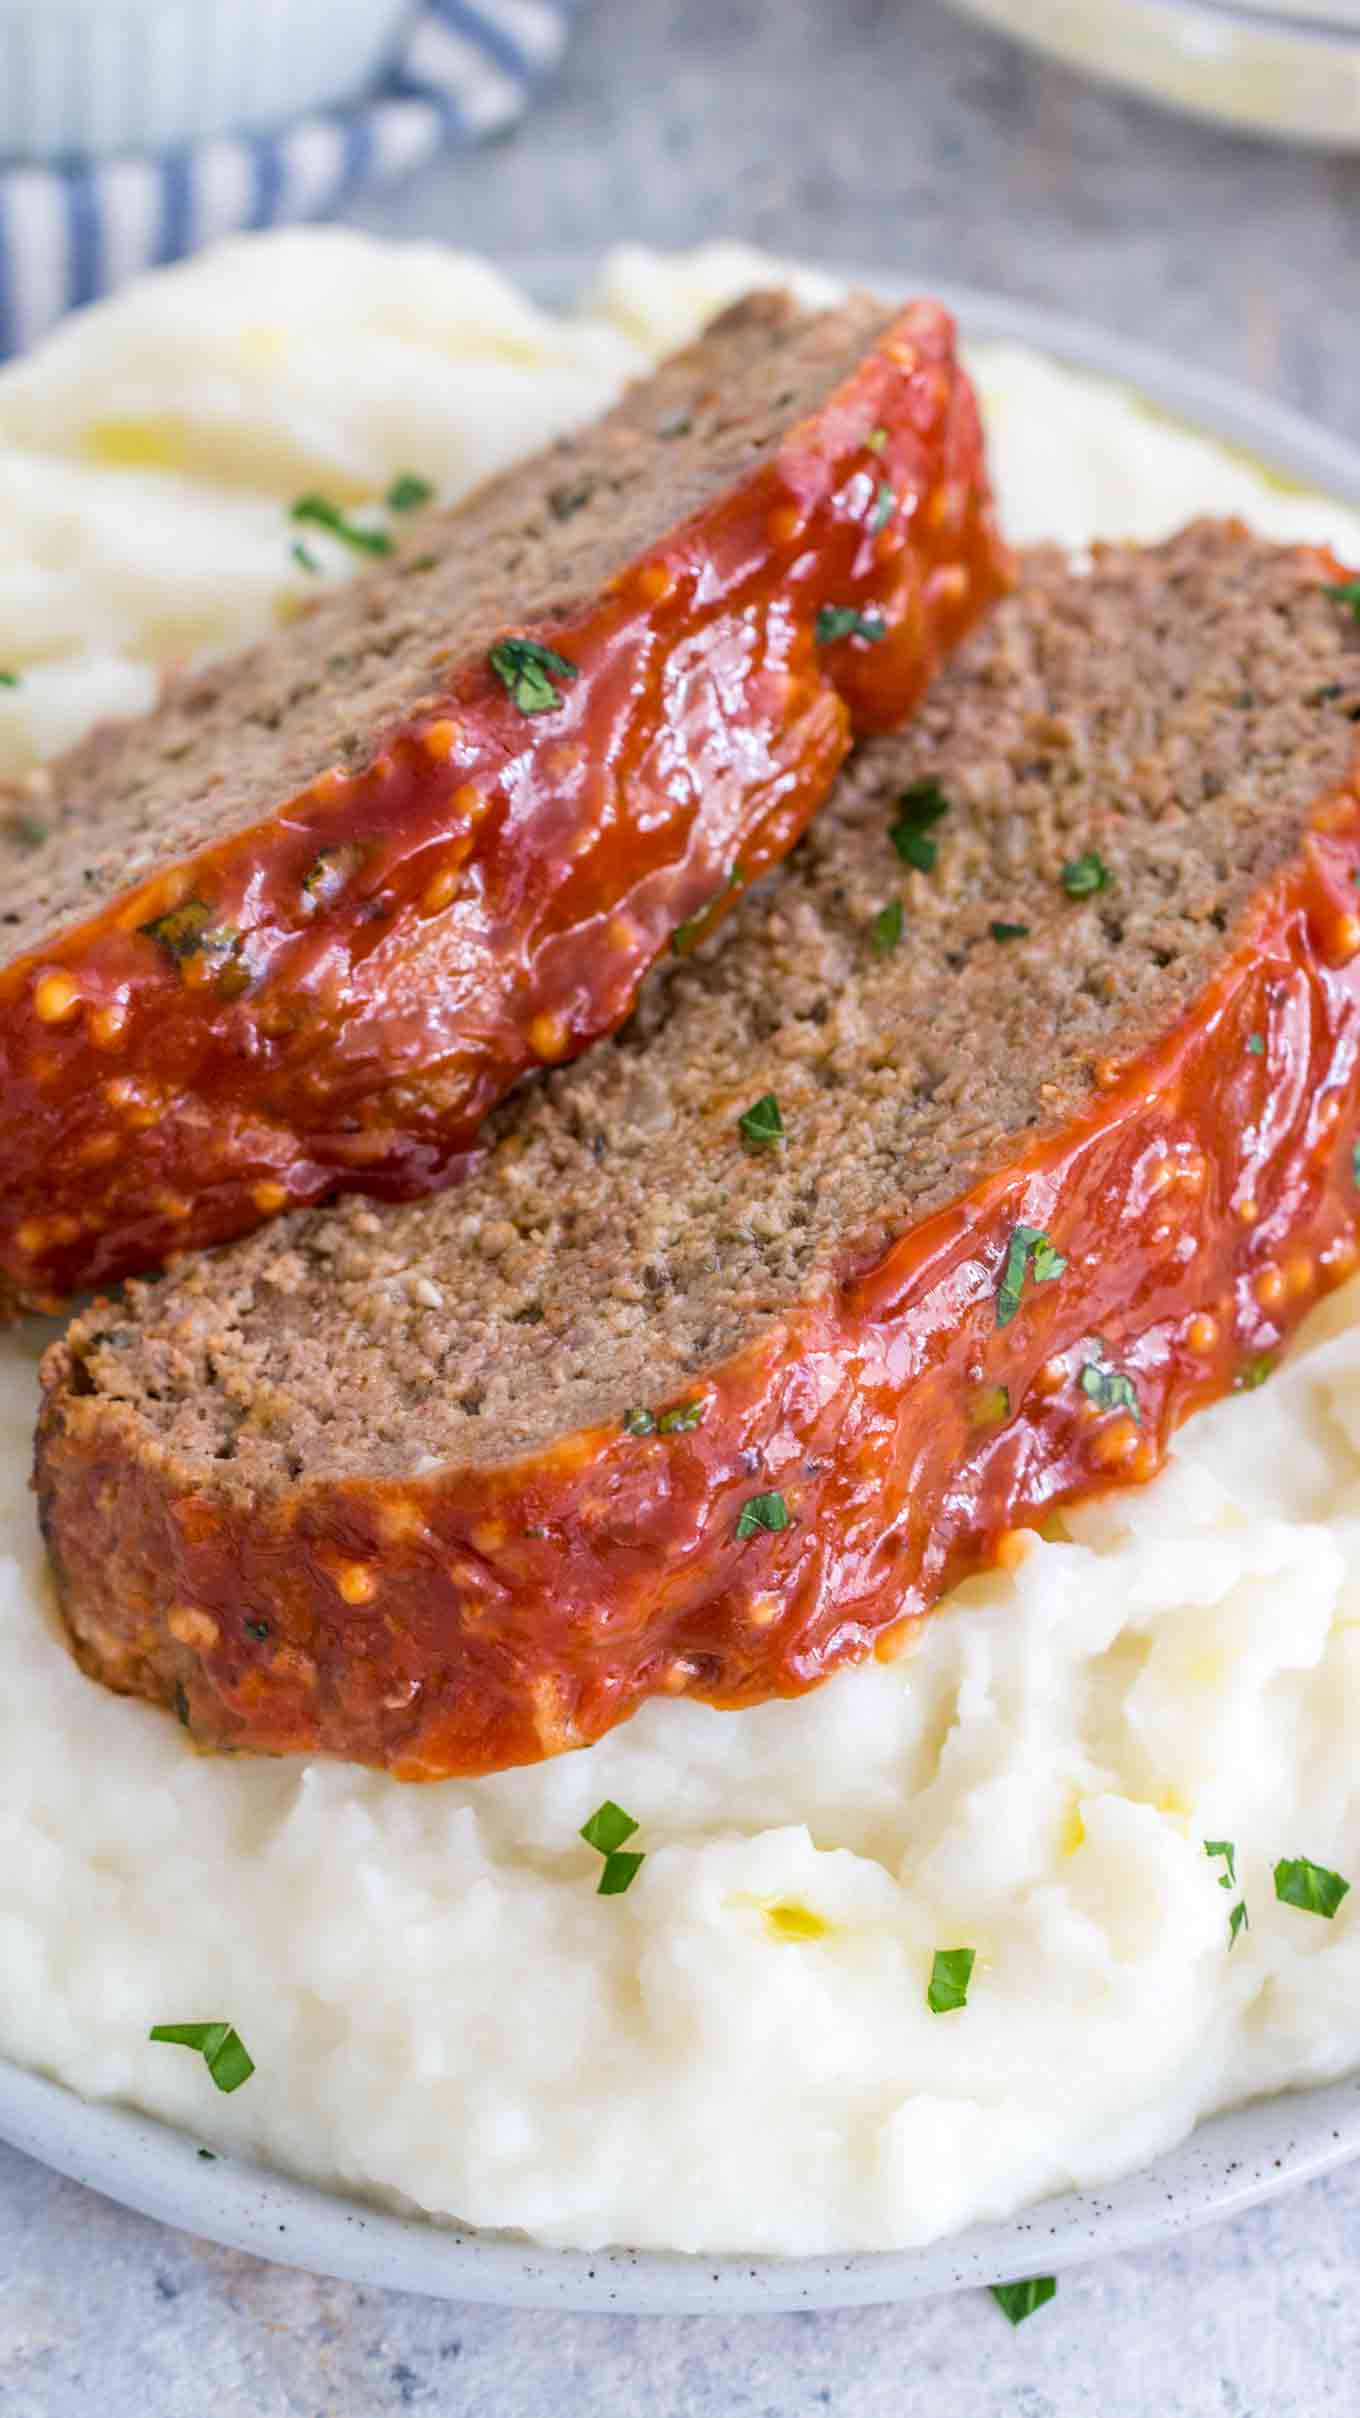 Best Meatloaf Recipe [VIDEO] - Sweet and Savory Meals